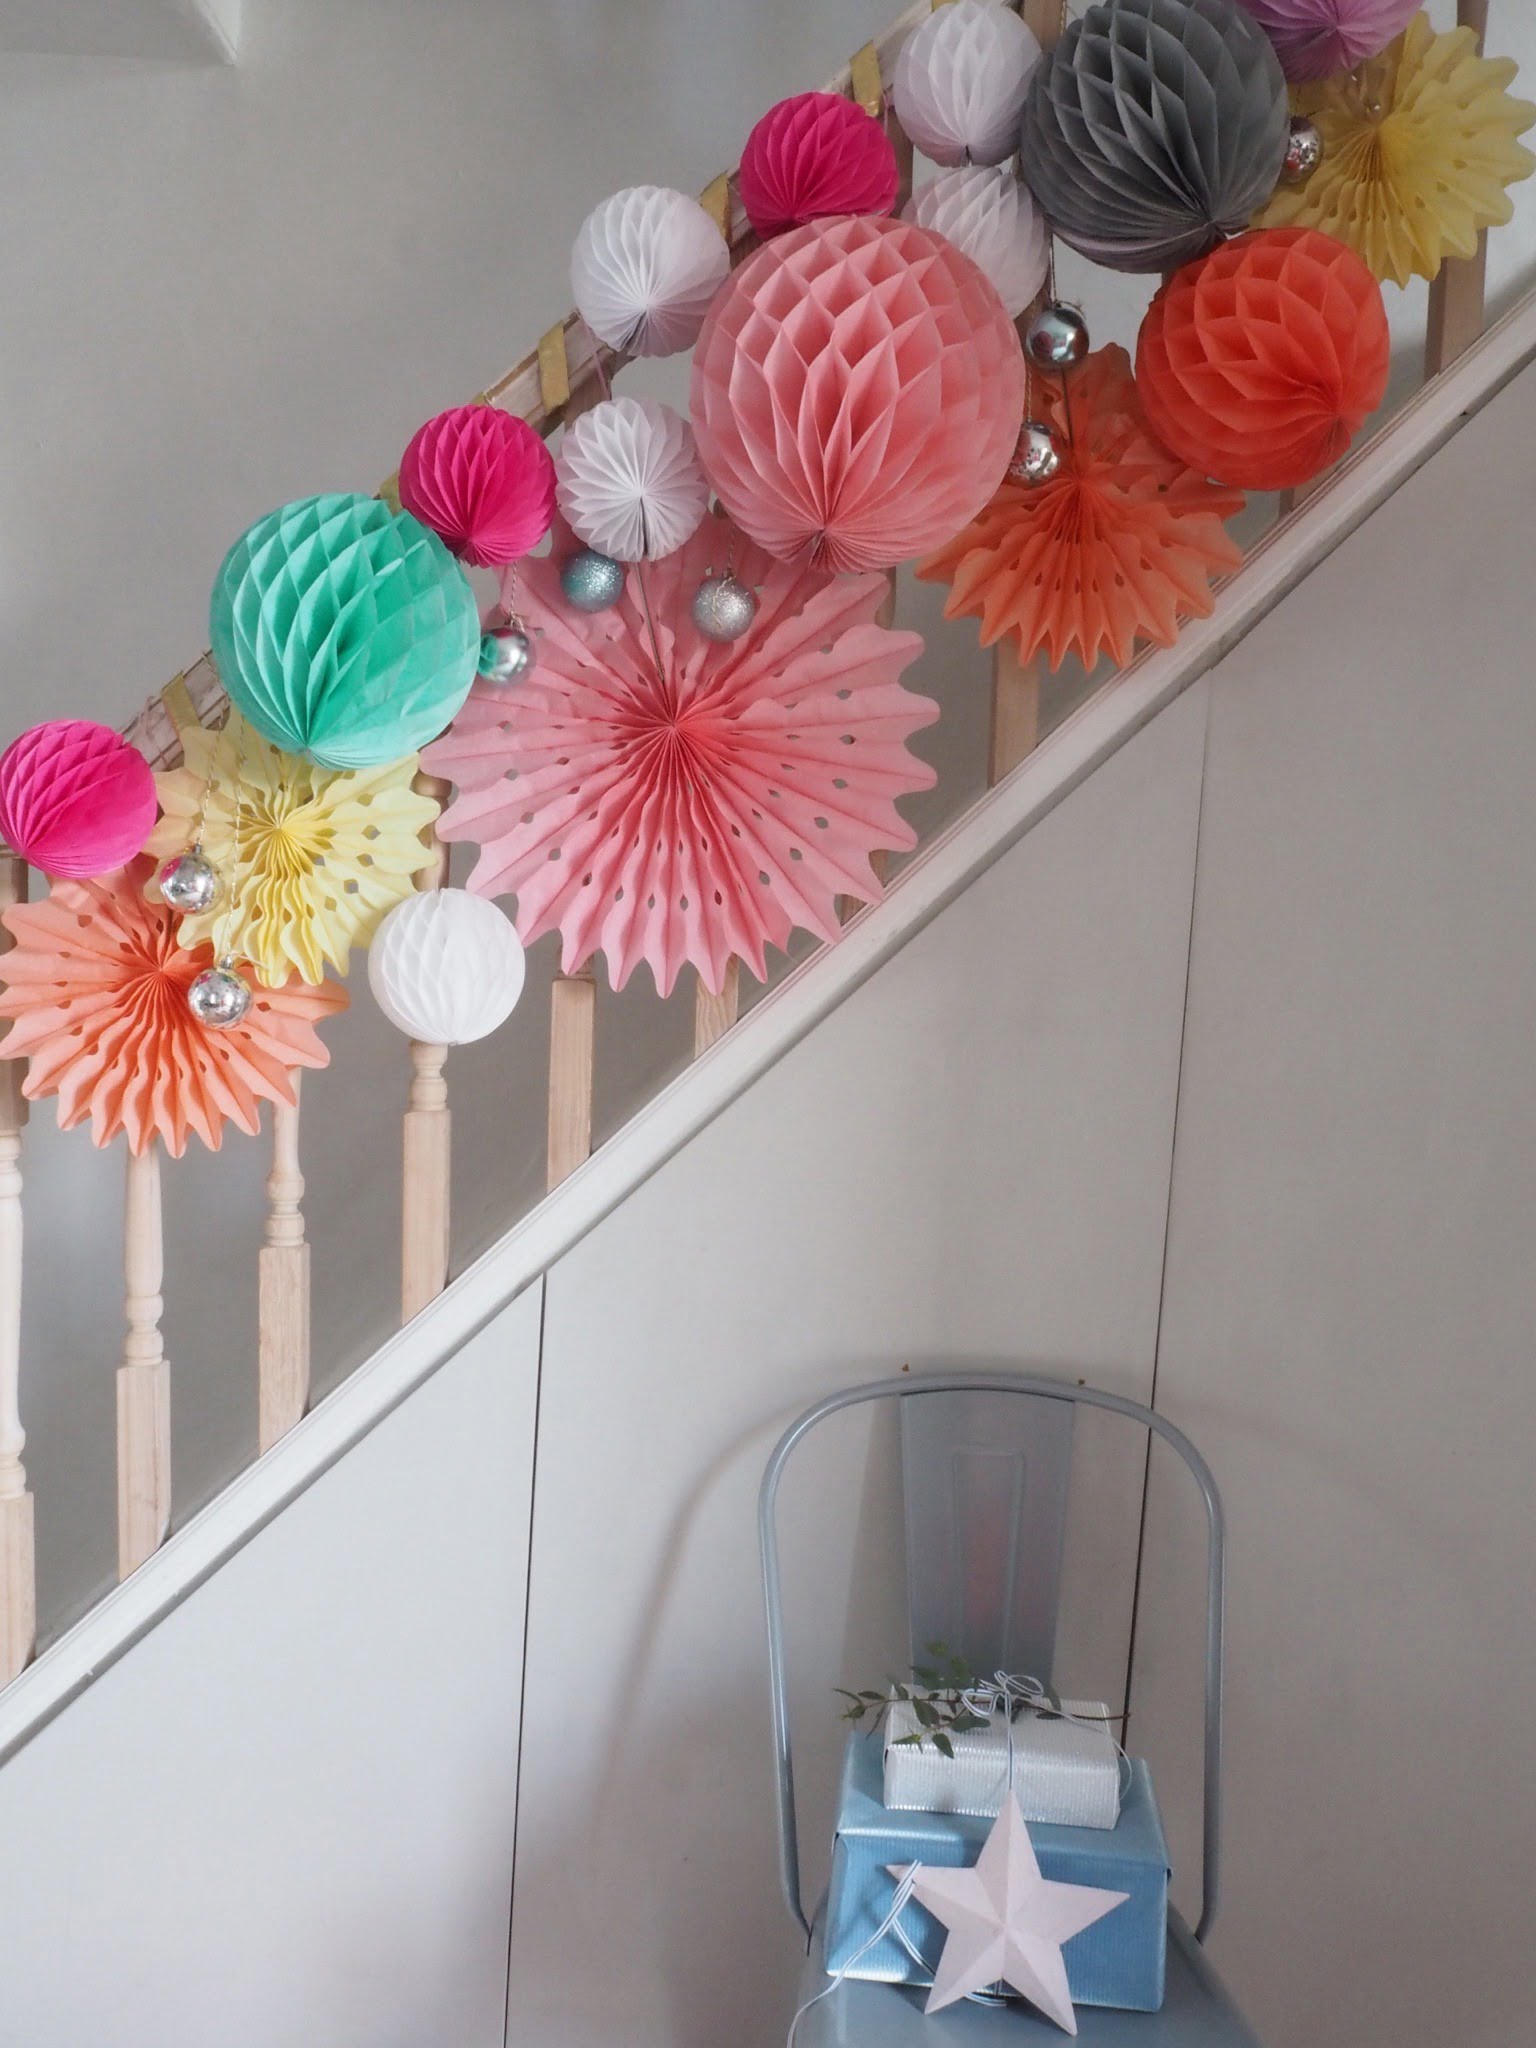 Set the perfect tone for your festive party with this pretty paper garland. It’s fun, festive and dead easy to do says interior stylist Maxine Brady.